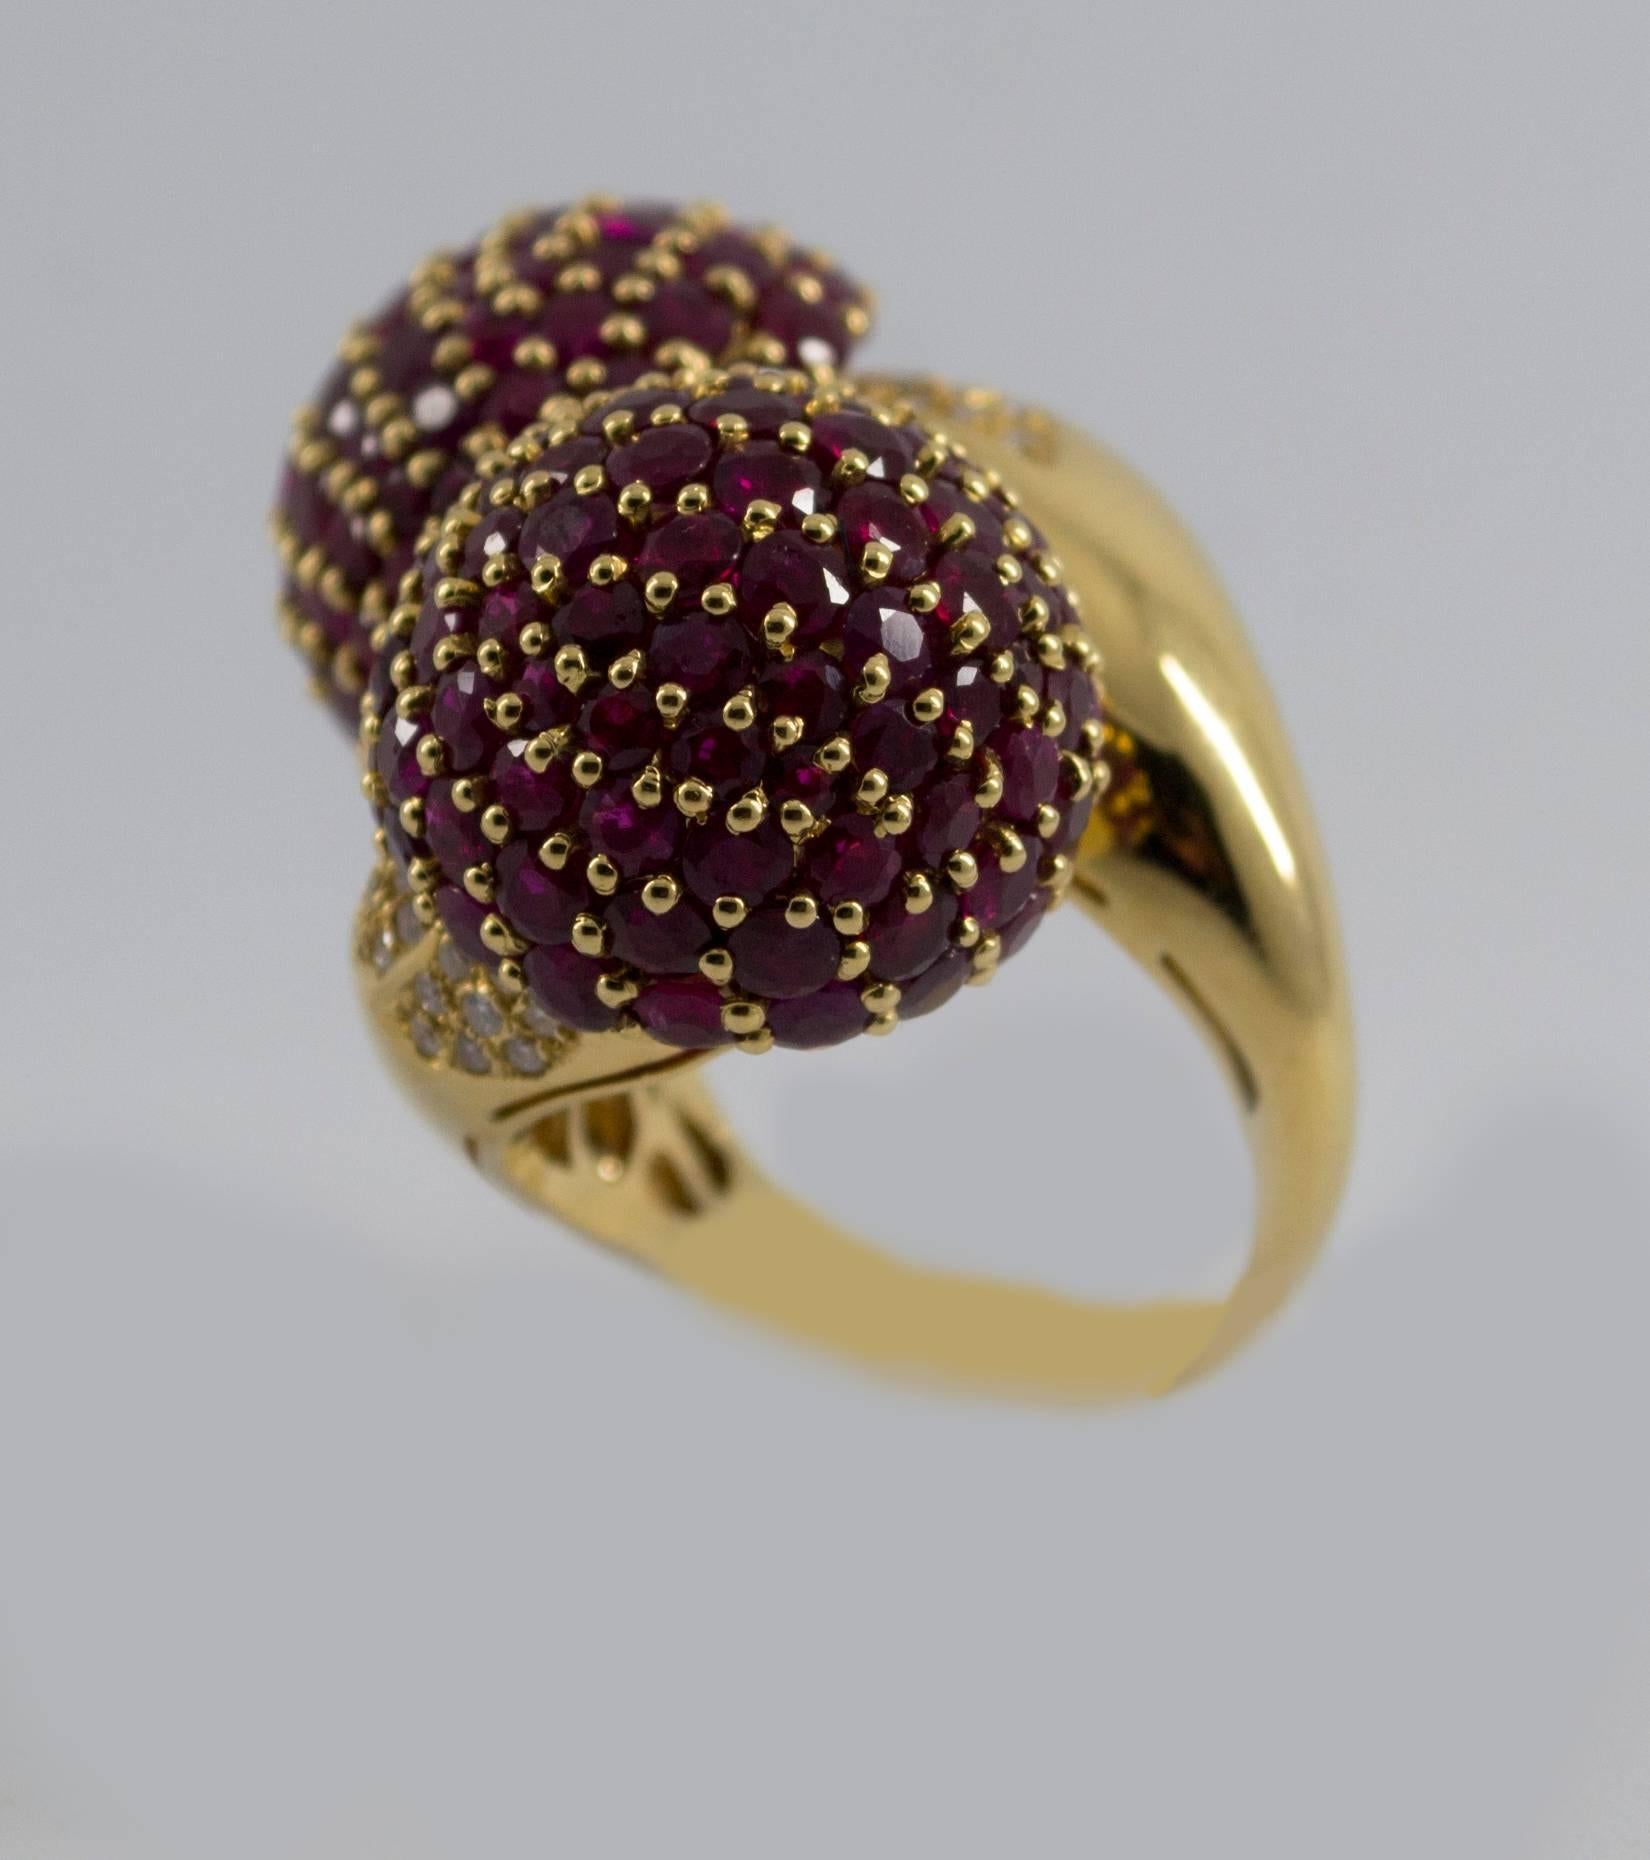 This contrarié ring is made of 18K yellow Gold.
This ring has 19.60 Carats of Rubies.
This ring has 0.50 Carats of Diamonds.
Size ITA: 16 Size USA: 7.5
We're a workshop so every piece is handmade, customizable and resizable.